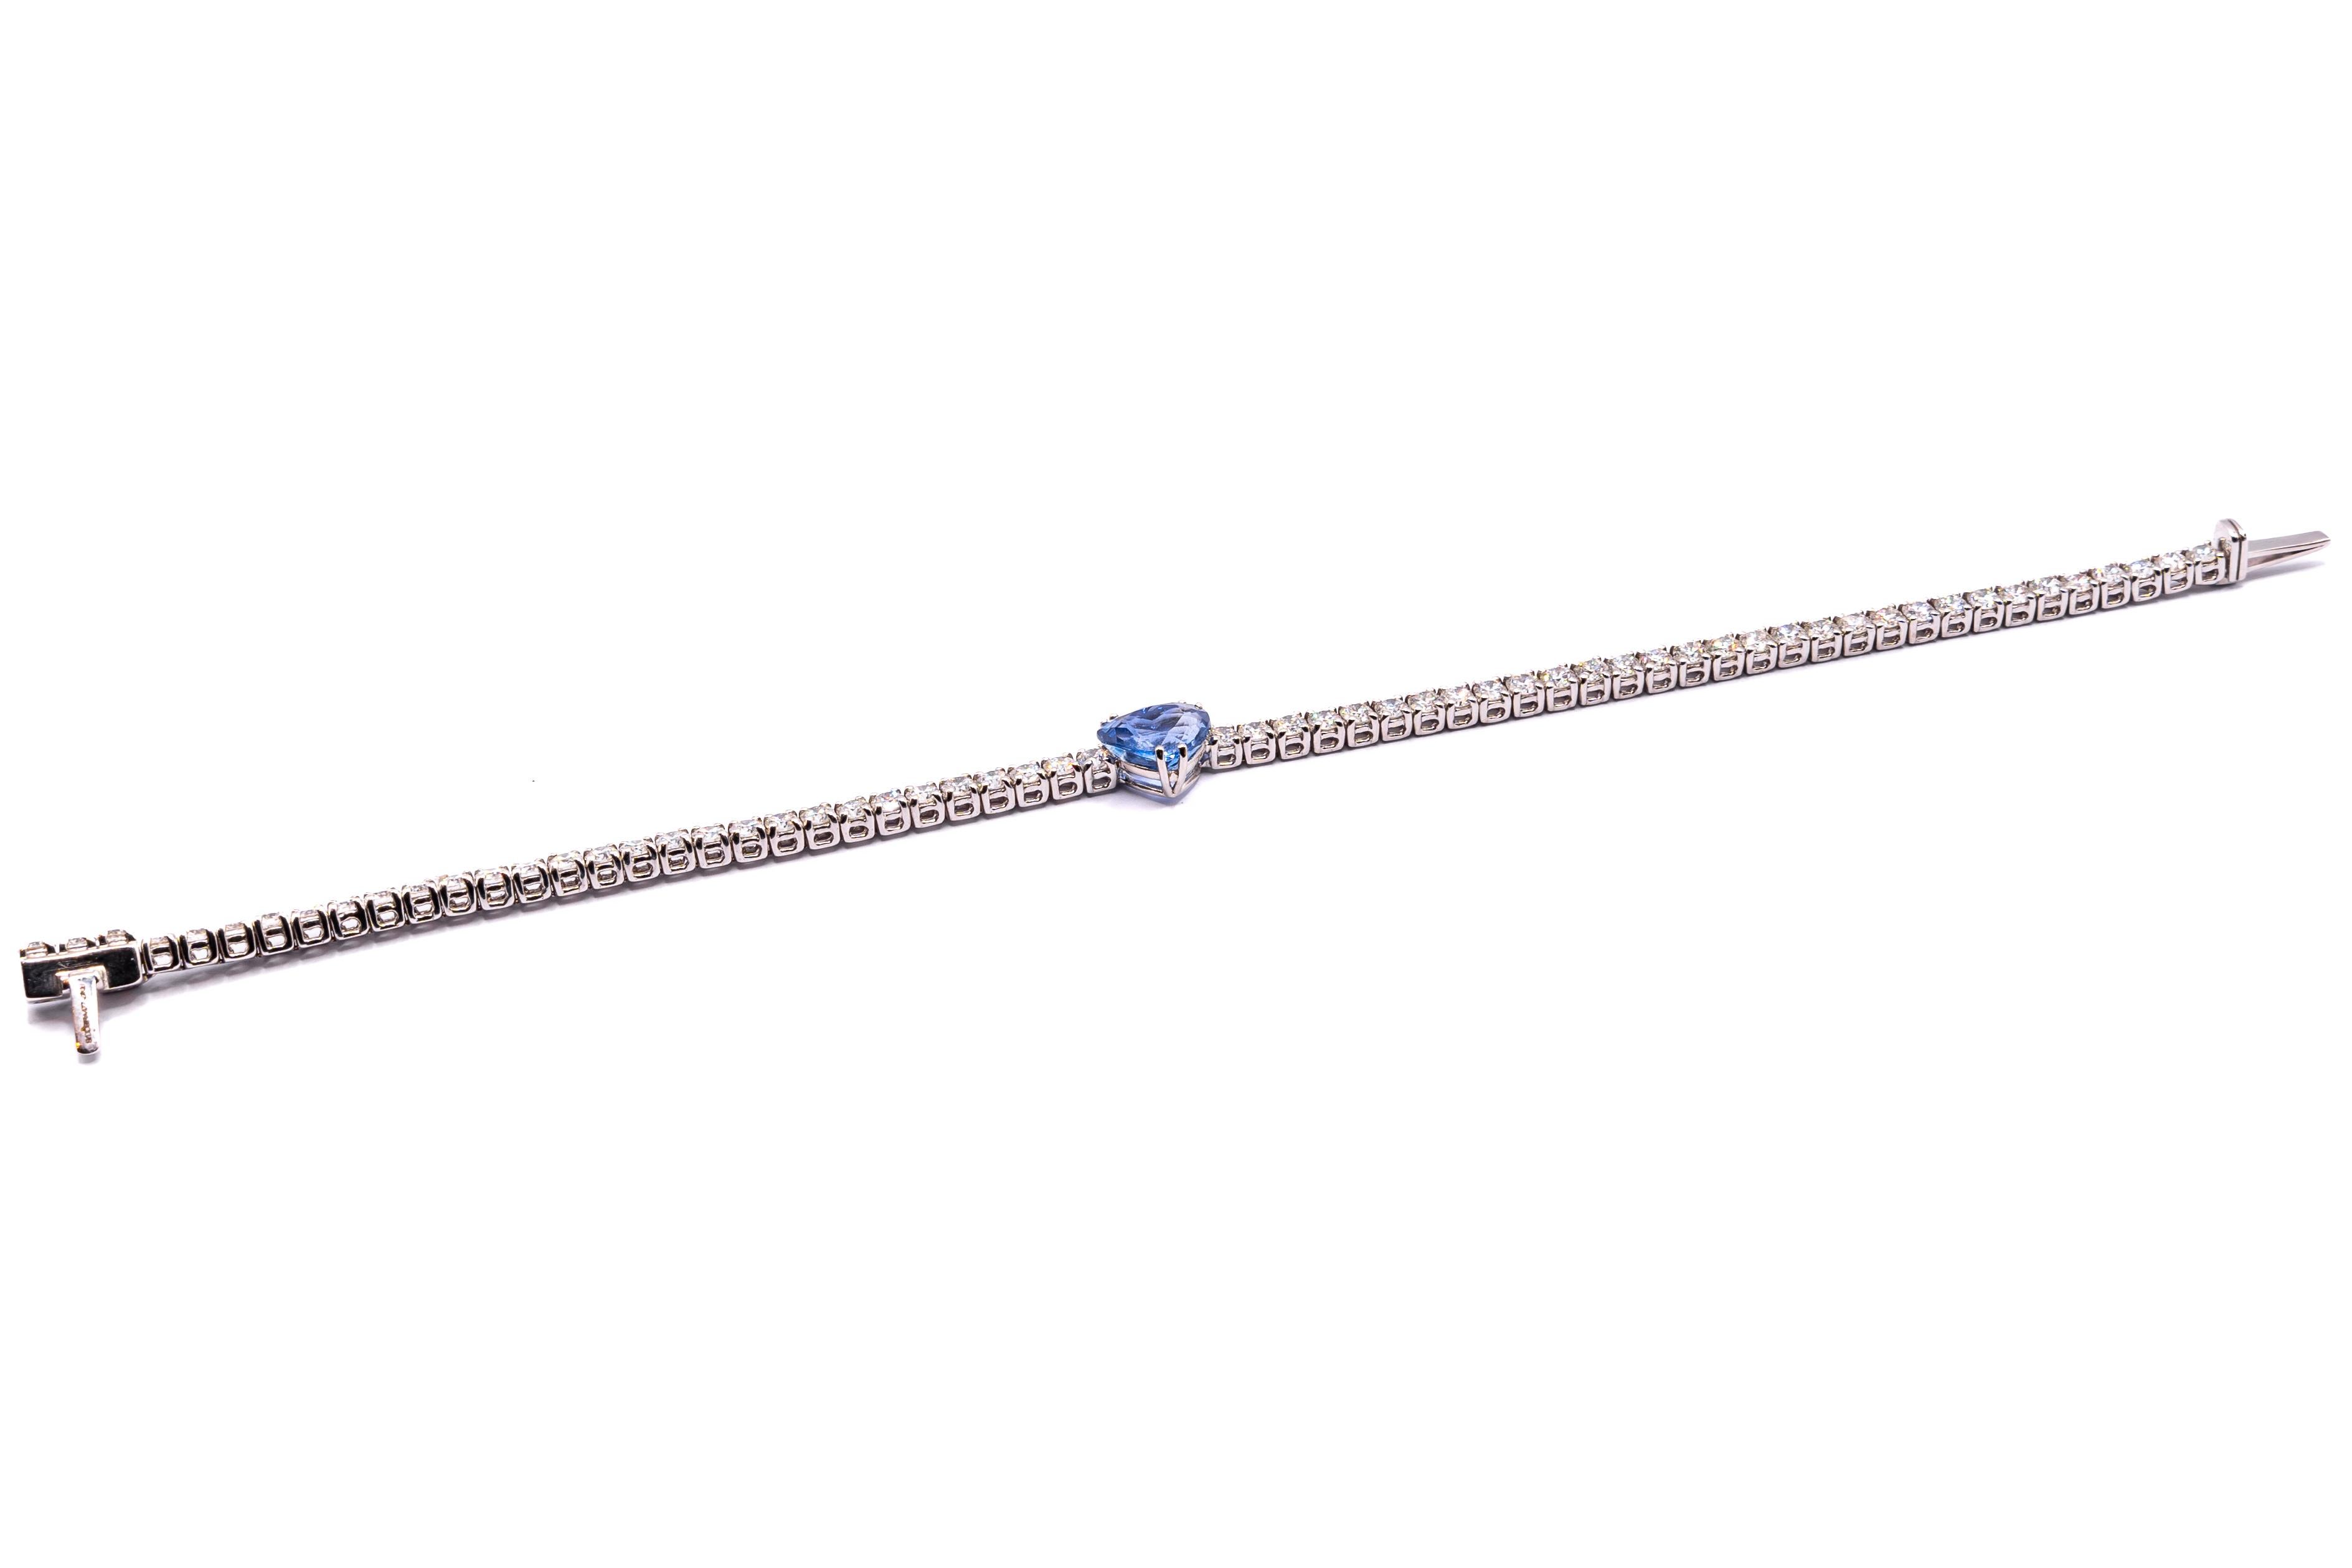 11.70 grams 18 carat white gold tennis bracelet with 4.77 carats of VS G color diamonds and a 2.01 carat heart shaped Sapphir the lenght of the bracelet is 17,5 centimeters. This tennis bracelet is part of our signature collection, made in Italy in